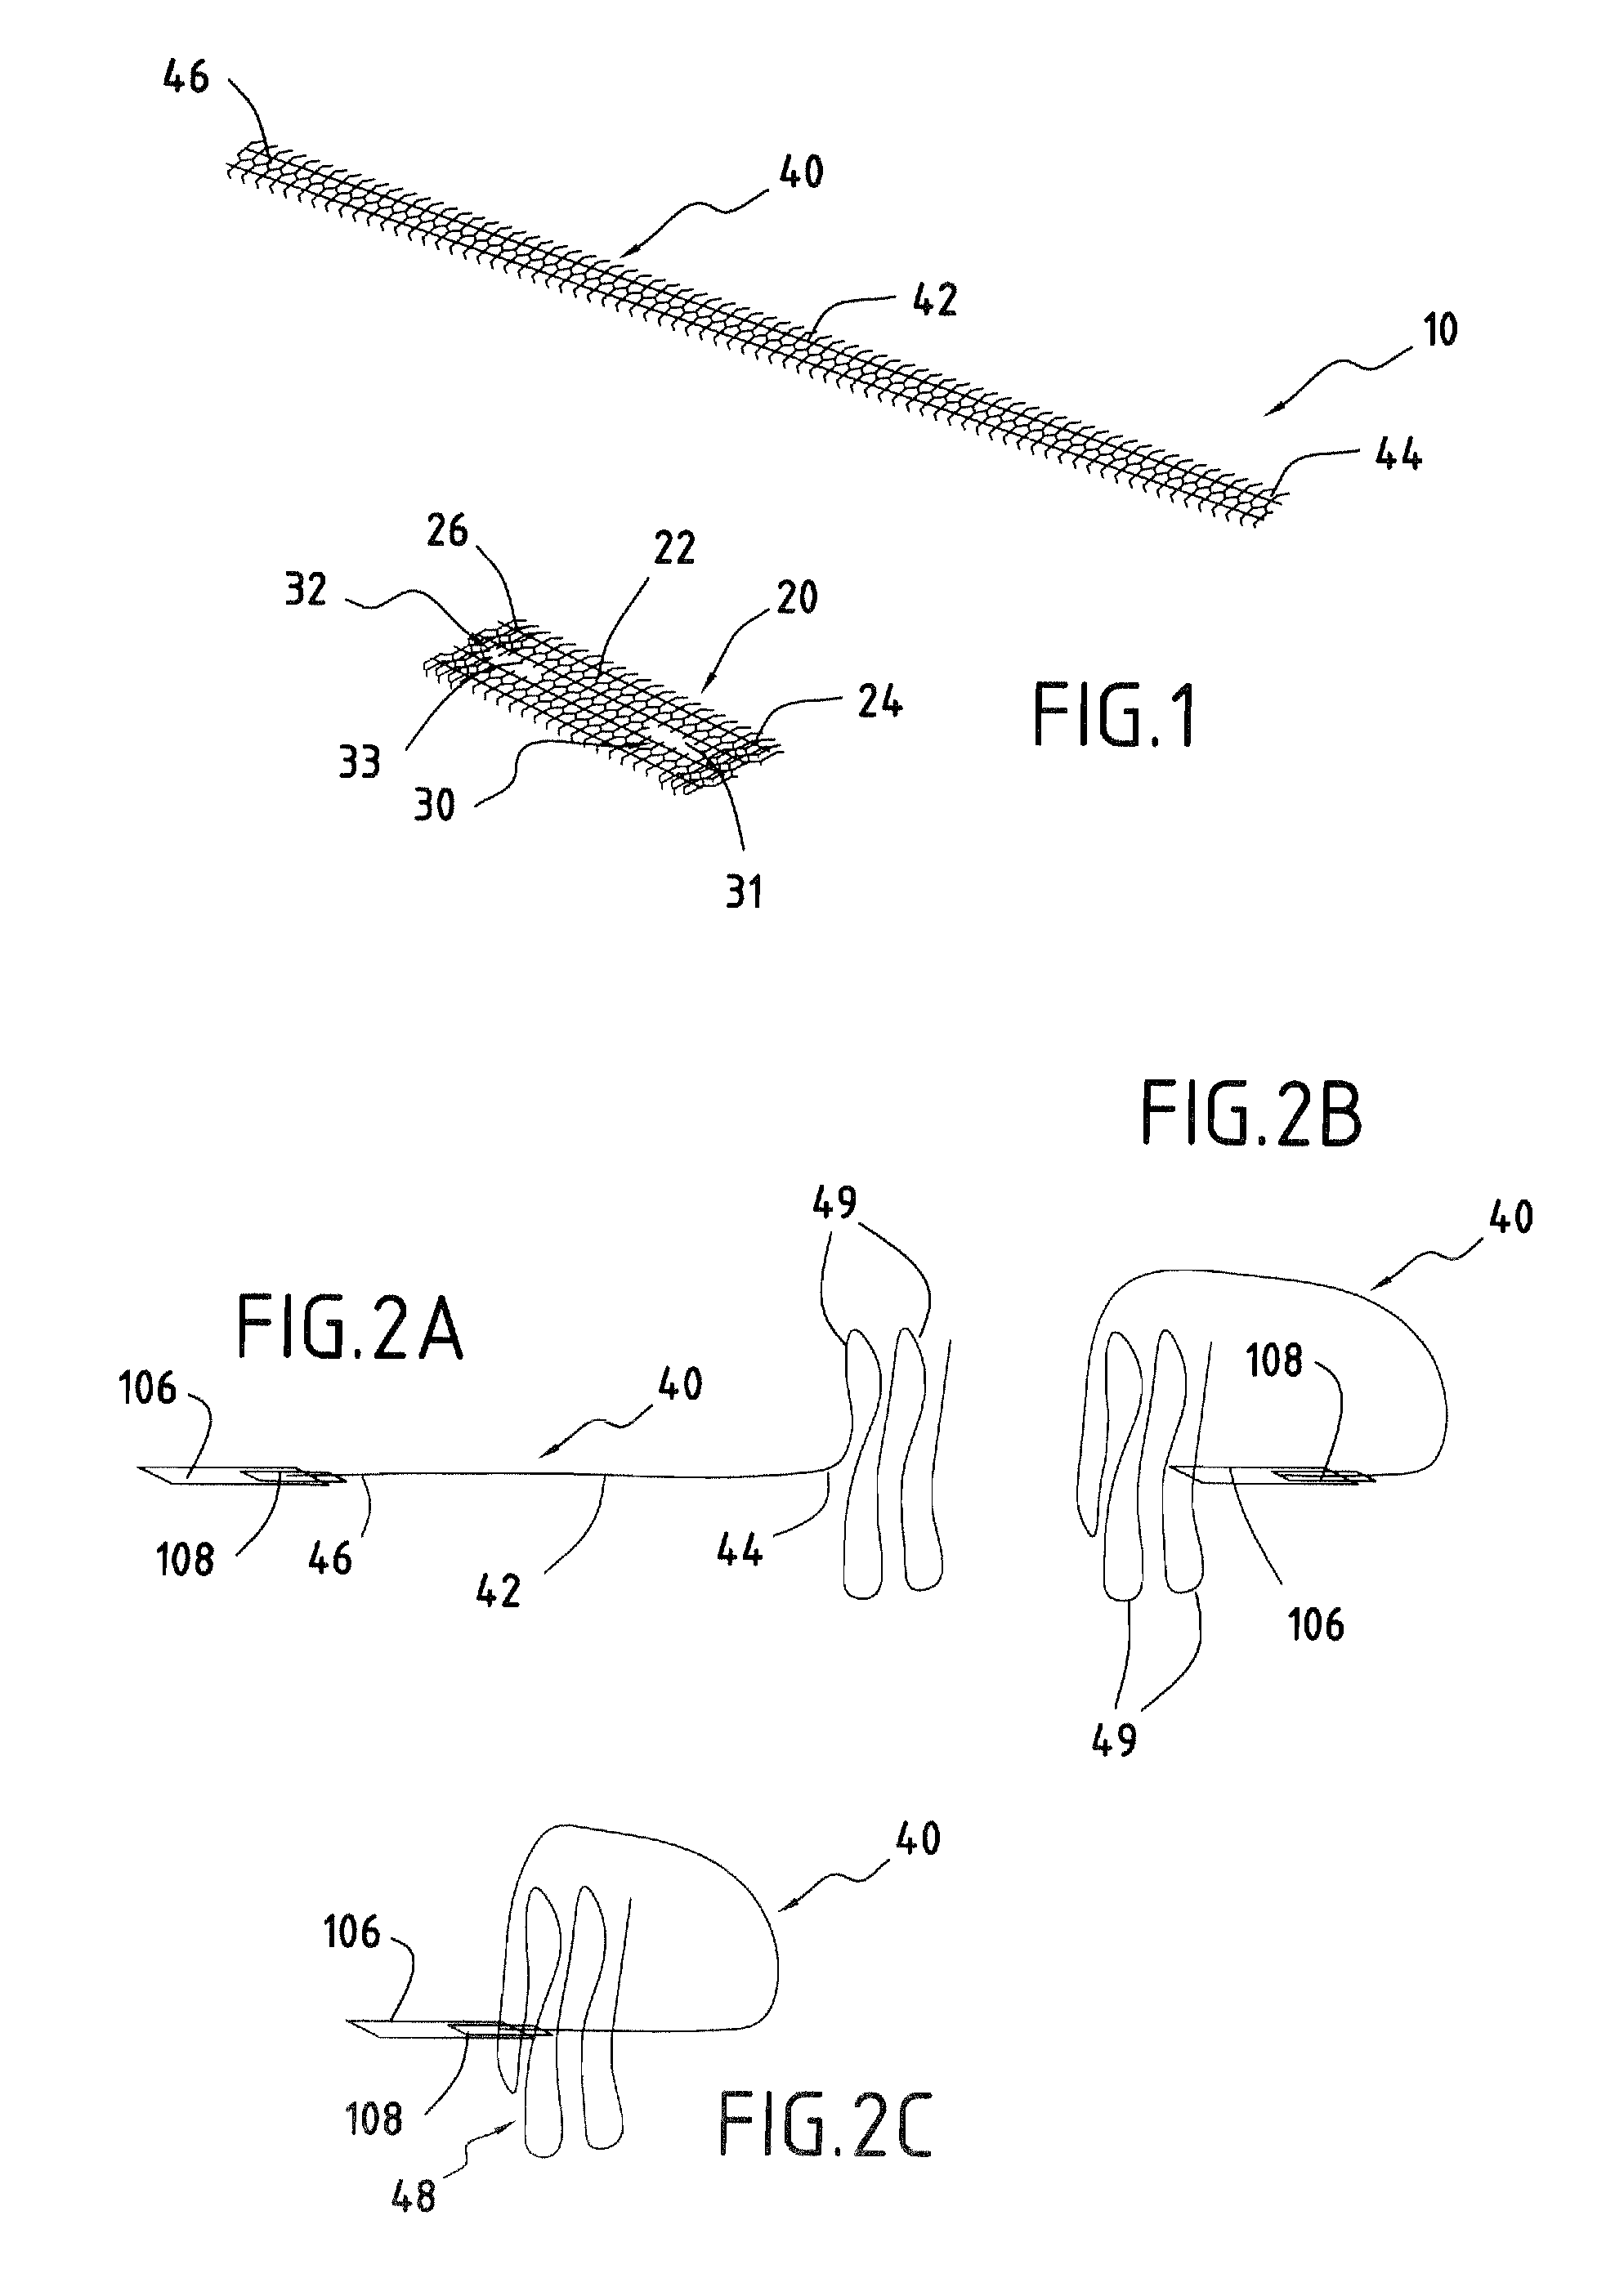 Surgical device forming a surgical prosthesis